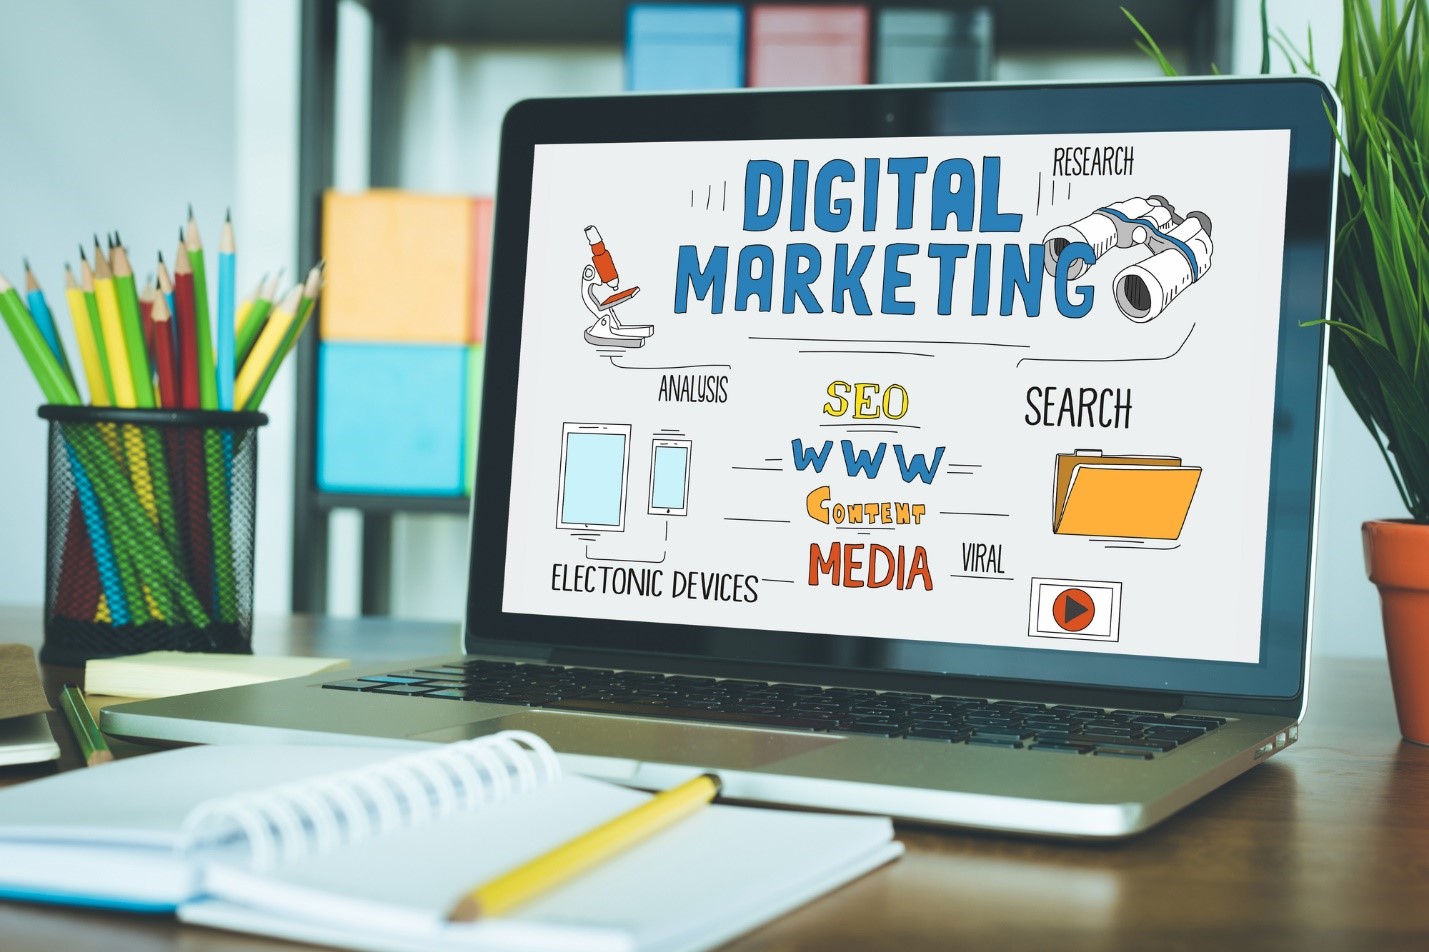 Digital Marketing Channels and Brand Awareness